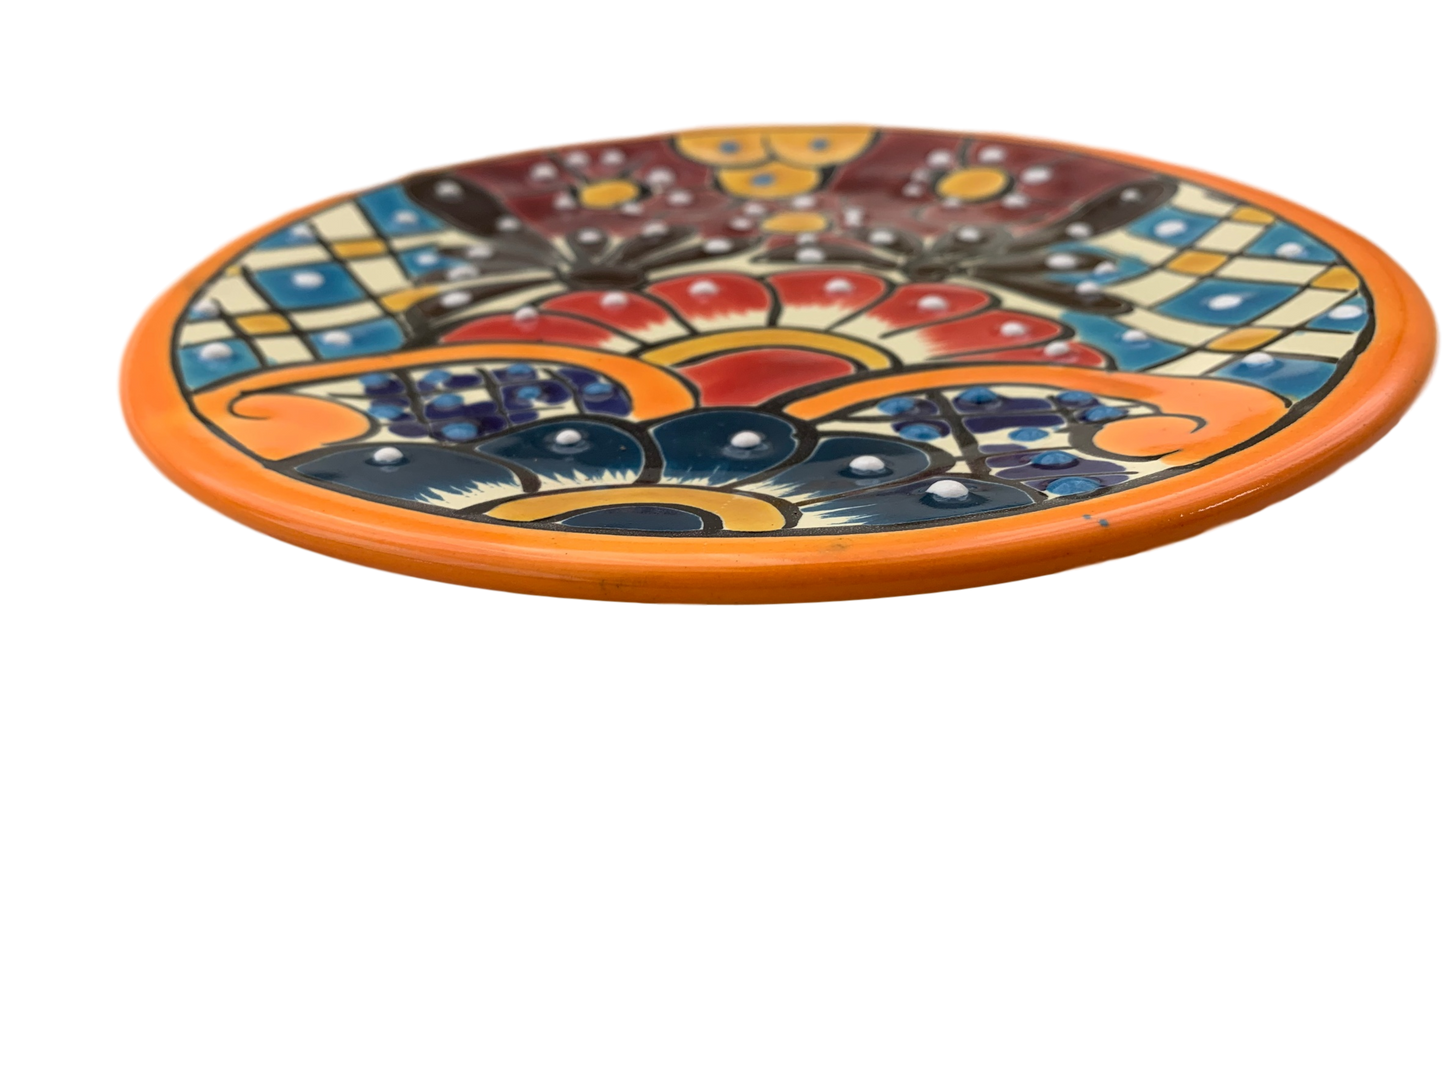 Exquisite Mexican handmade Talavera plate featuring vibrant handpainted Mexican folk art designs, made in Mexico for an authentic and unique dish experience.